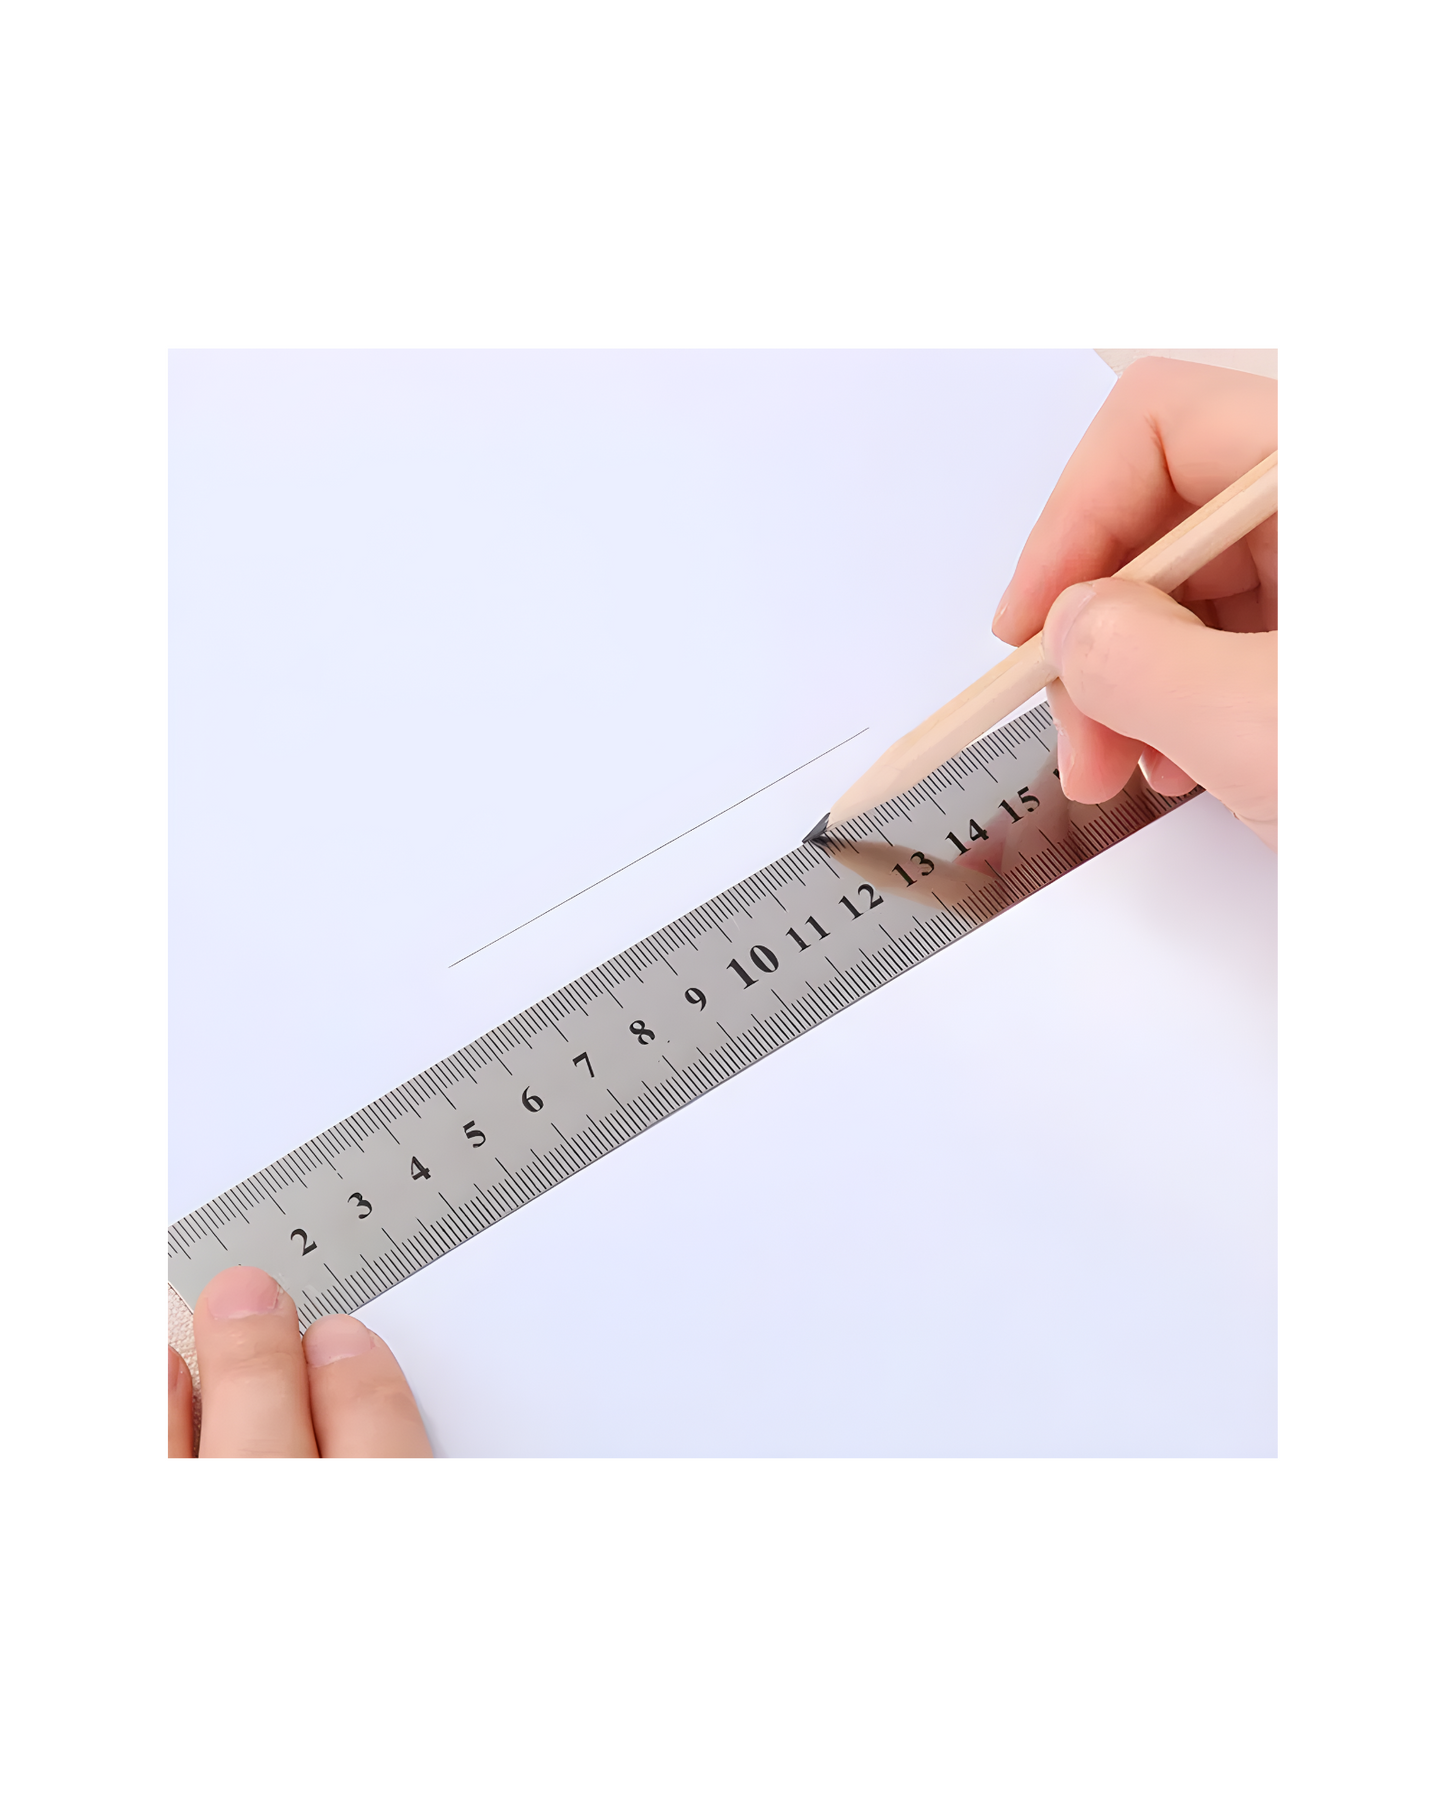 Metal Straight Ruler 24inches (12pcs)